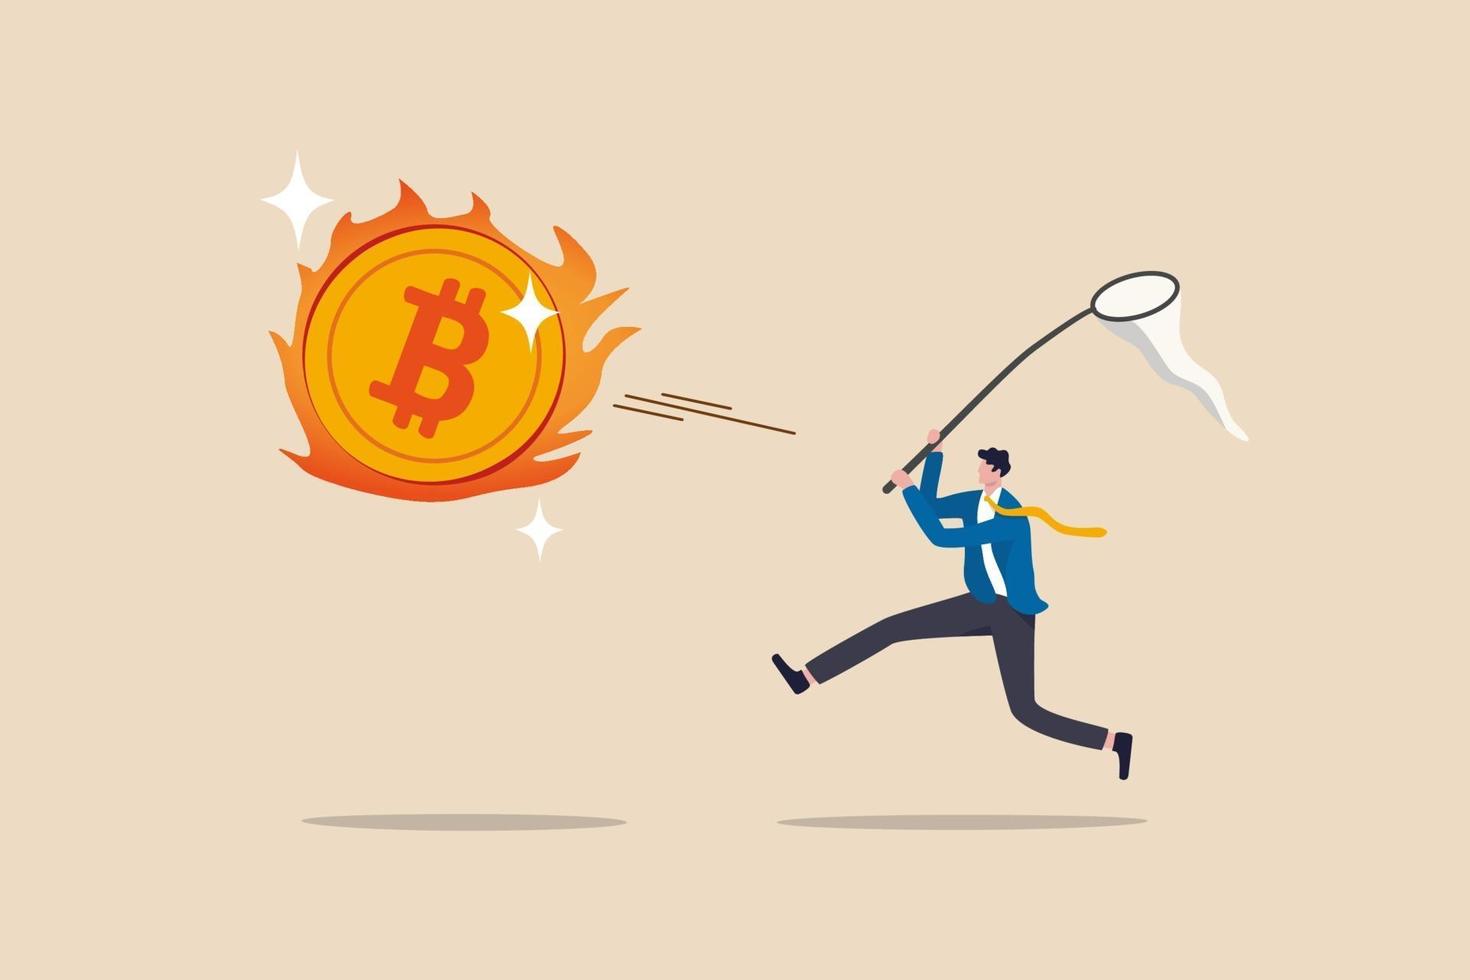 Chasing high performance bitcoin crypto currency in bull market, greedy speculation in Bitcoin trading concept, greedy businessman investor chasing try to catch hot fire flying bitcoin. vector